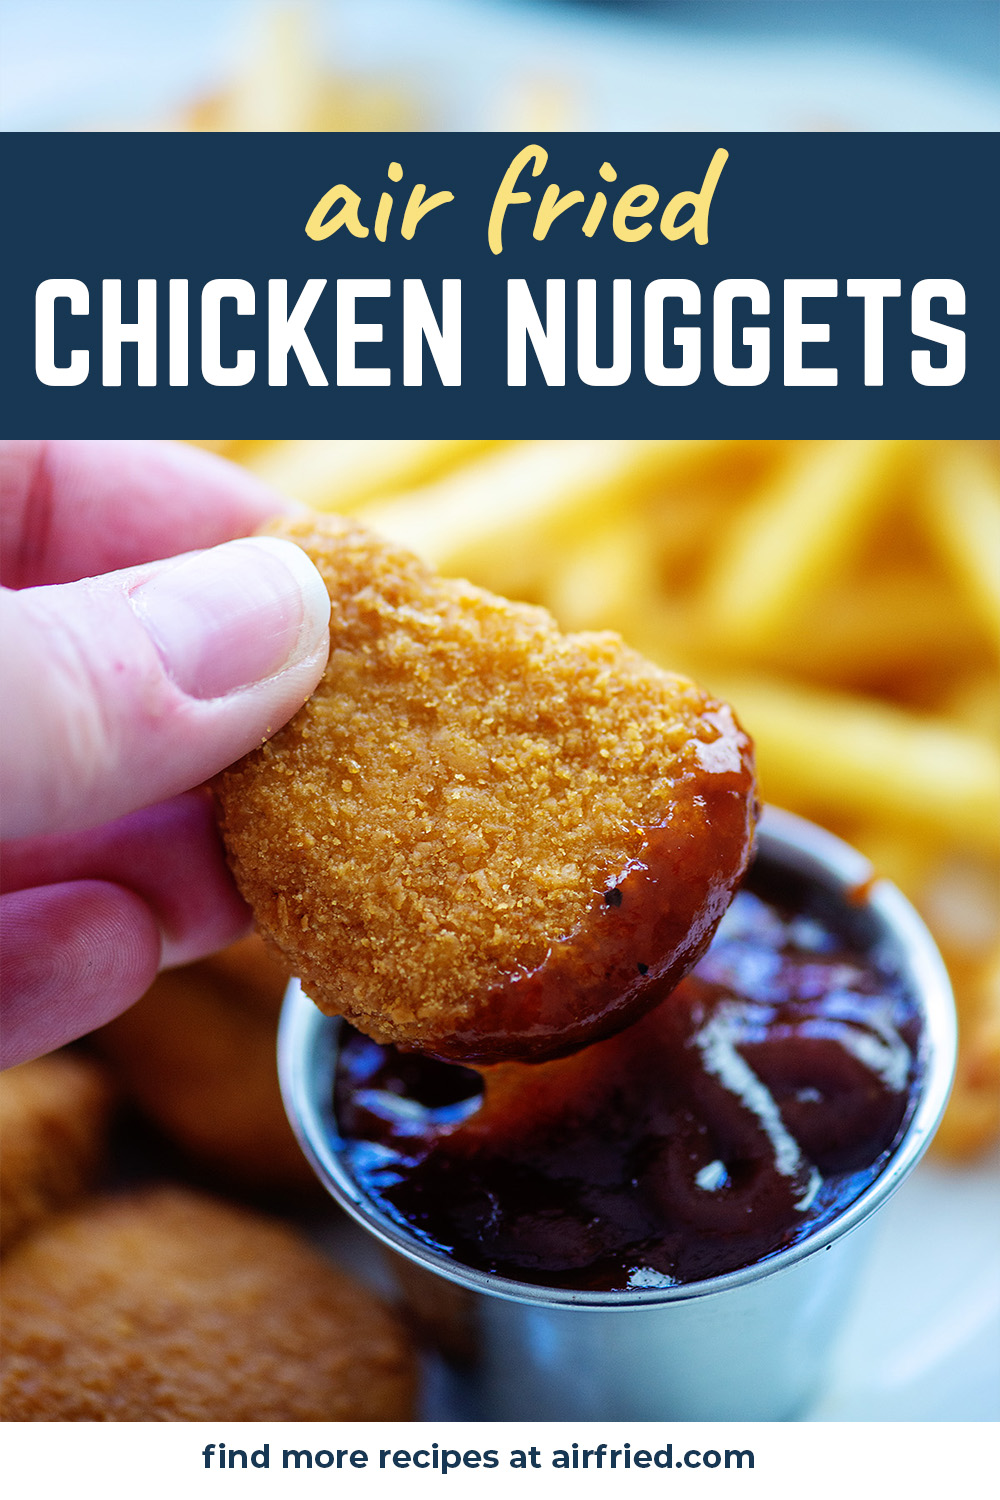 These crispy chicken nuggets are simple to make in the air fryer when you use frozen nuggets.  #frozenfoods #easyrecipes #airfried